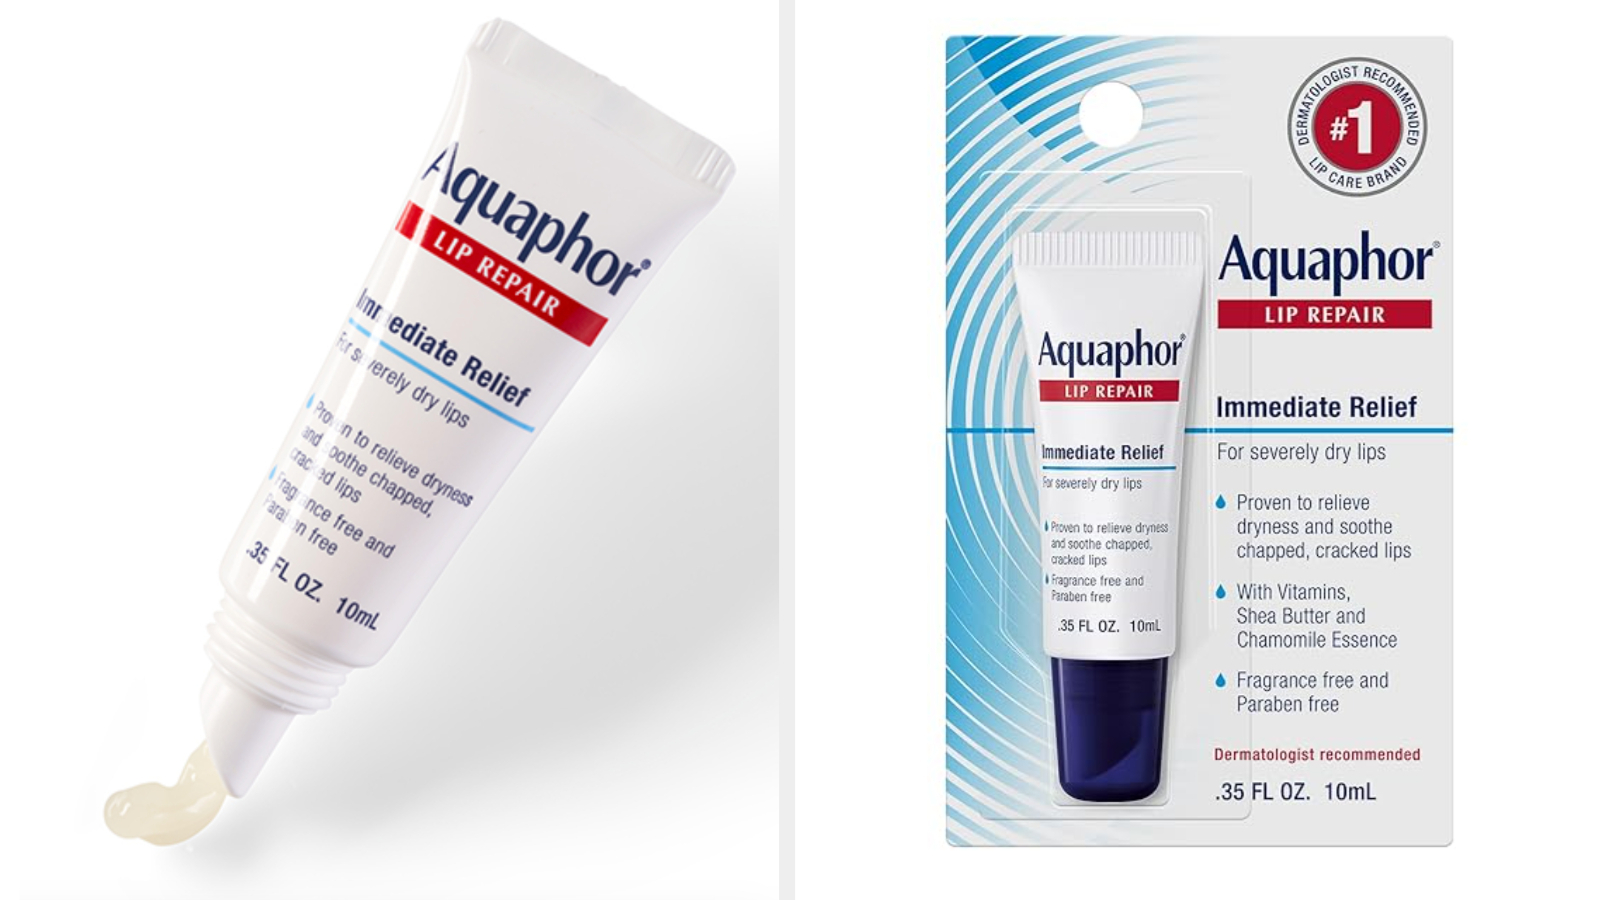 Tube of Aquaphor Lip Repair ointment next to its packaging